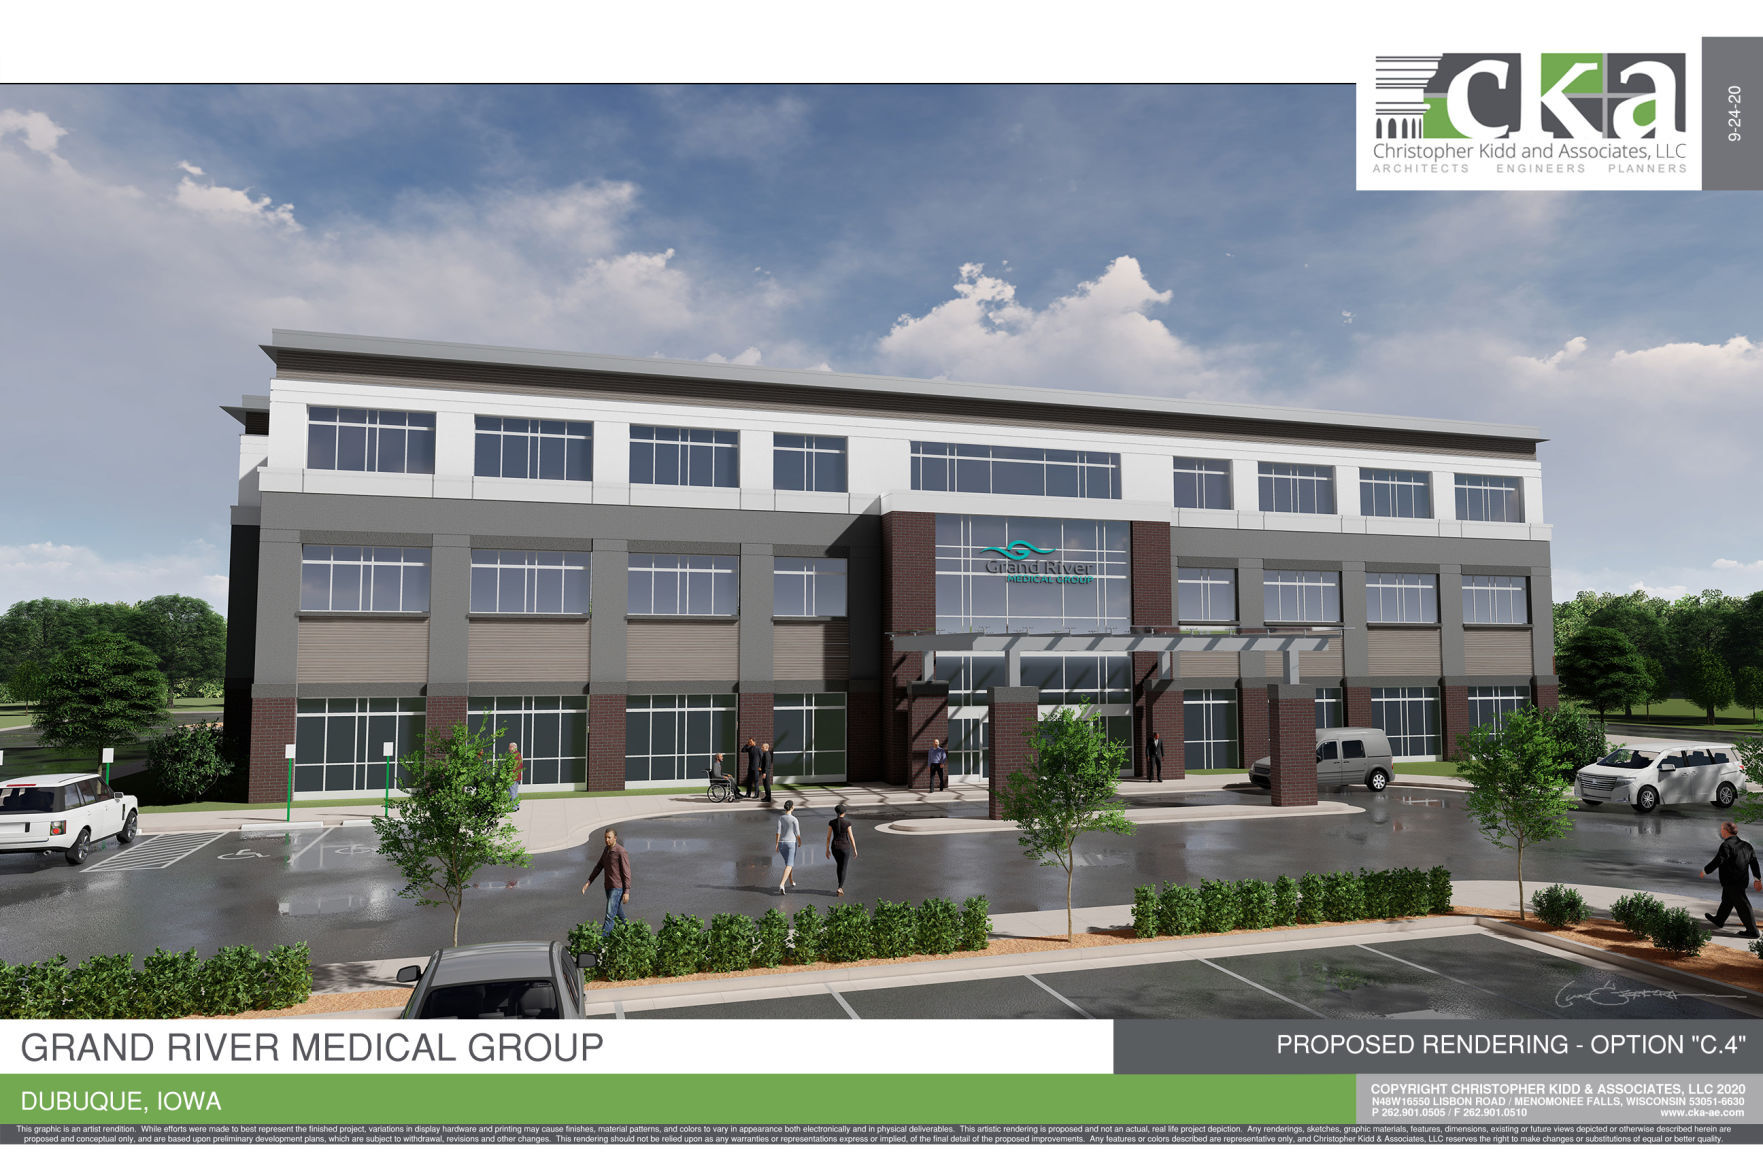 A rendering of the proposed Grand River Medical Group clinic that would be constructed on Westmark Drive and would replace the facility at 320 N. Grandview Ave. PHOTO CREDIT: Contributed